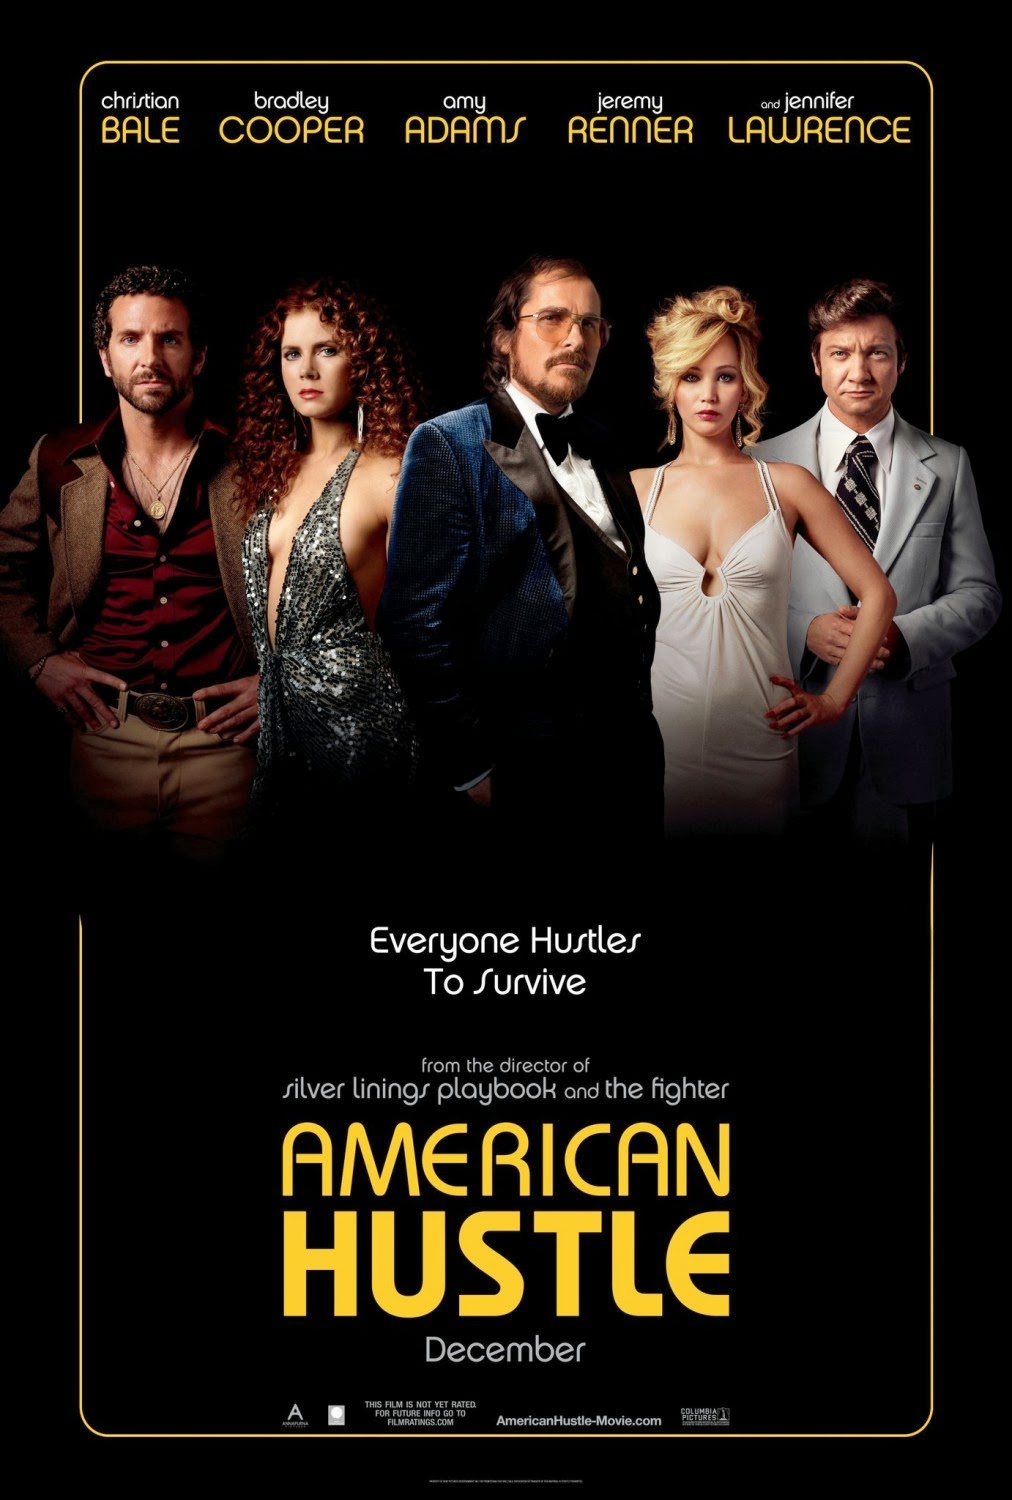 A Winning, Sexy Cast (And Bale) Score In 'American Hustle' (Movie Review)